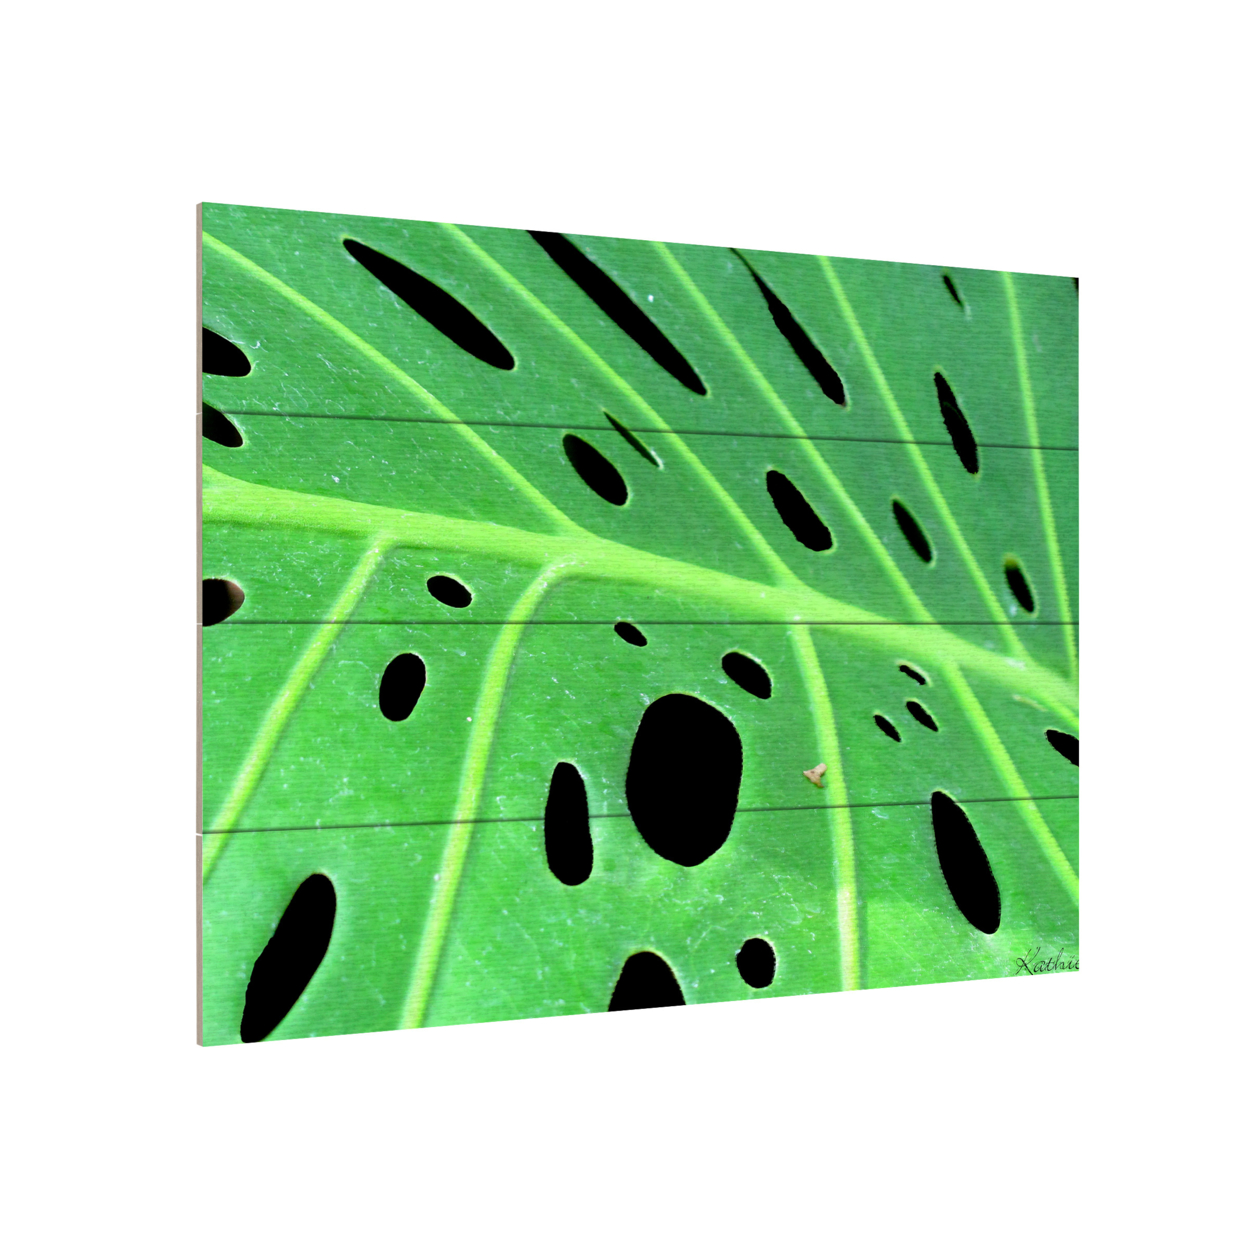 Wall Art 12 X 16 Inches Titled Tropical Leaf Ready To Hang Printed On Wooden Planks